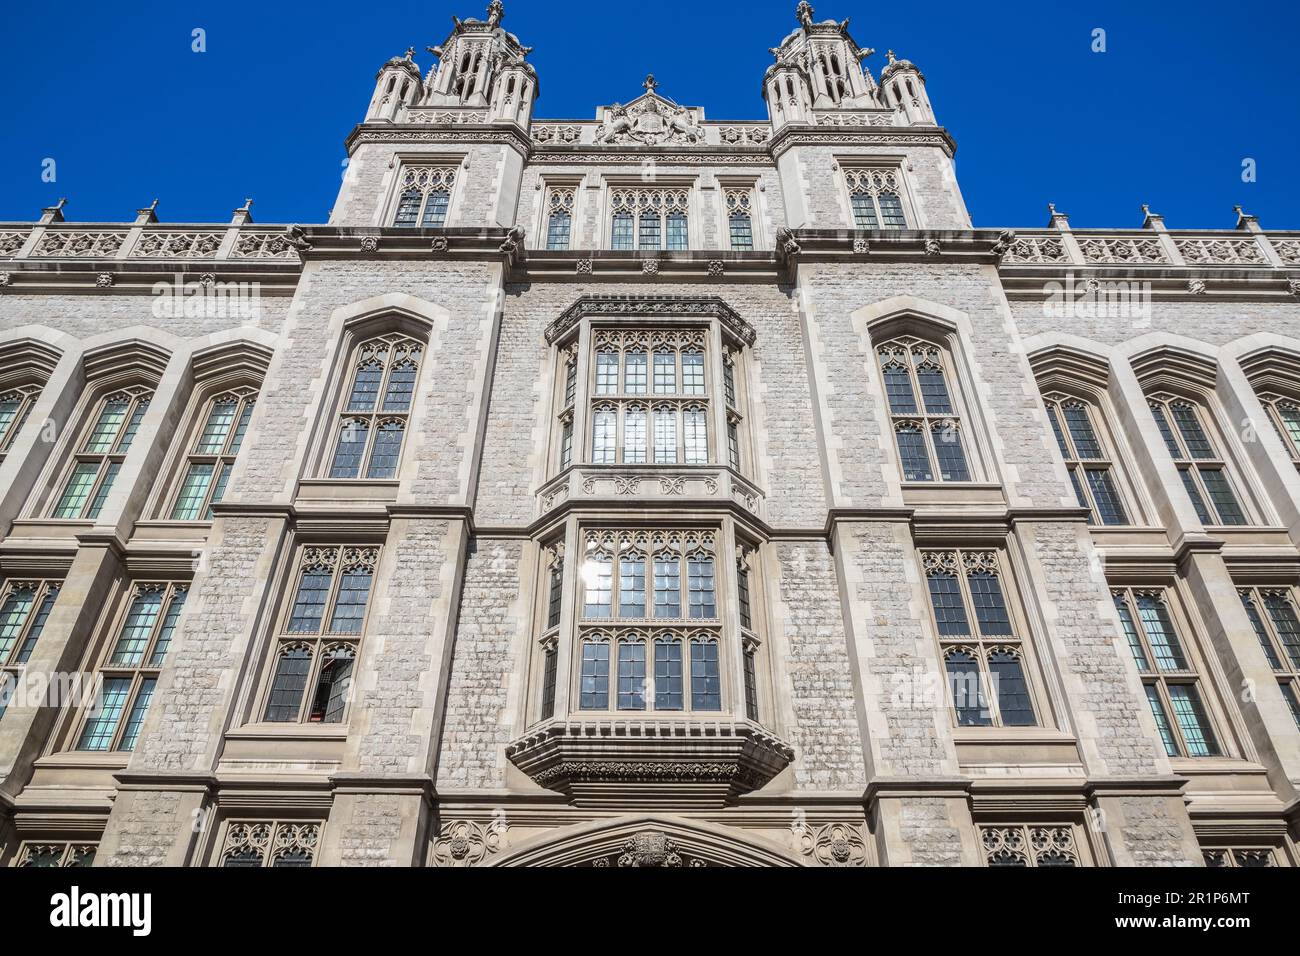 Die Maughan Library des King's College London zu sehen Stockfoto